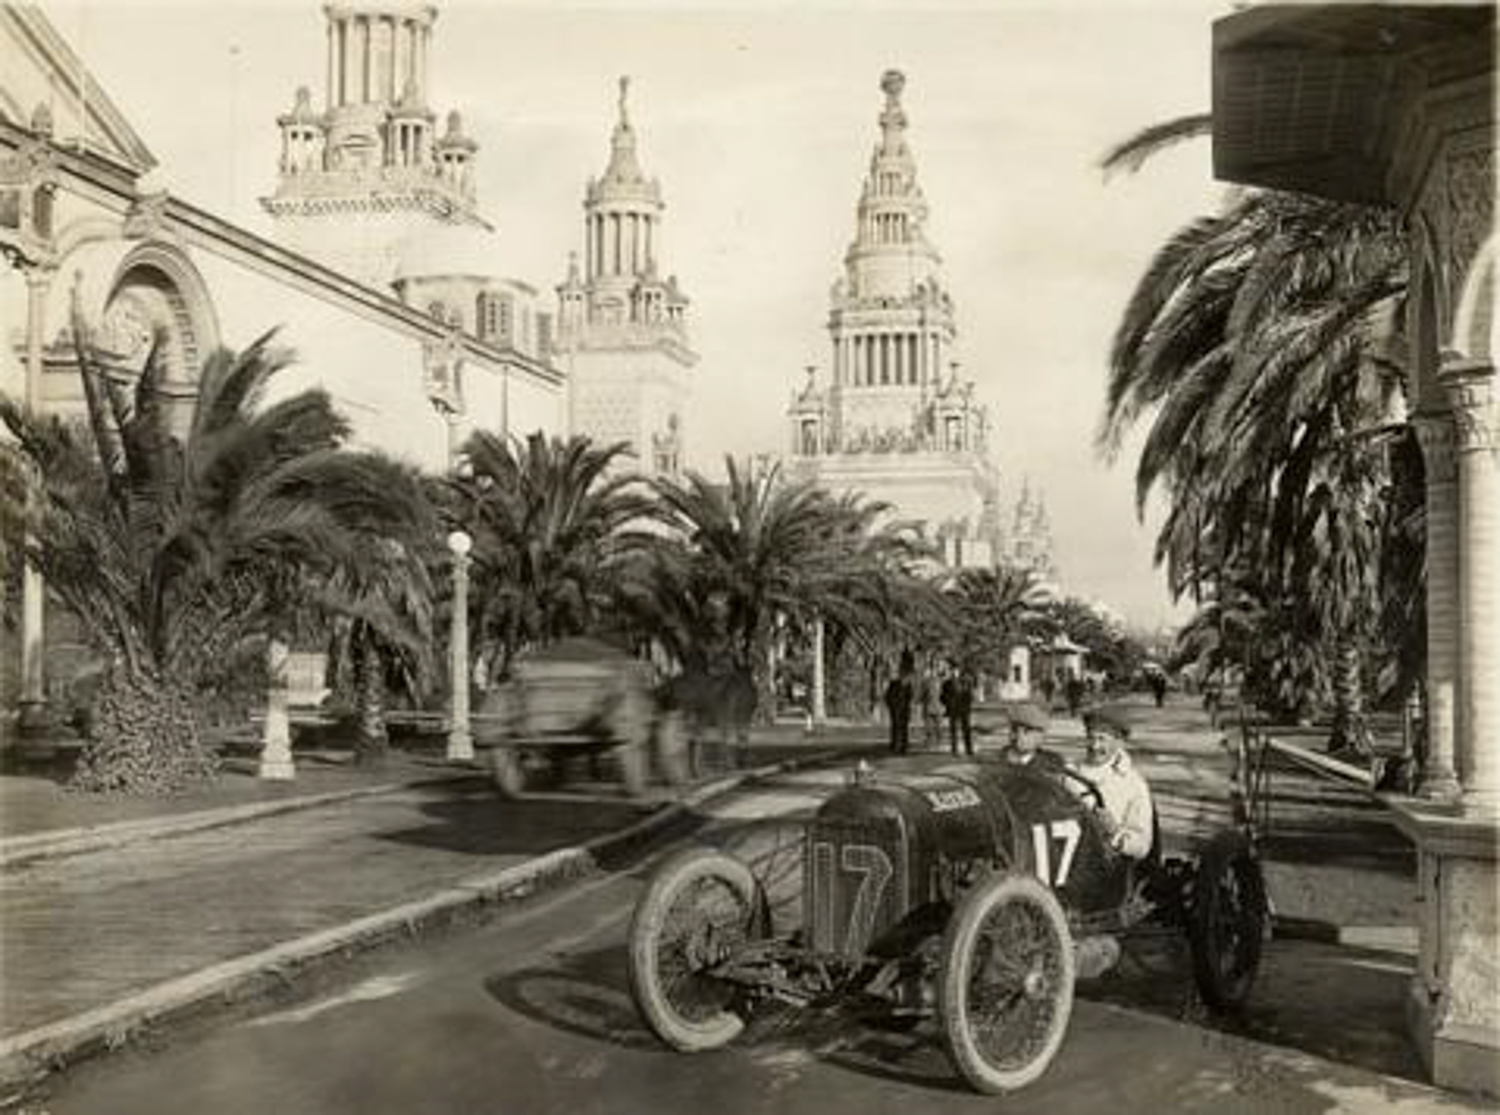 Rickenbacker and his Maxwell racecar in San Francisco promoting a race. 